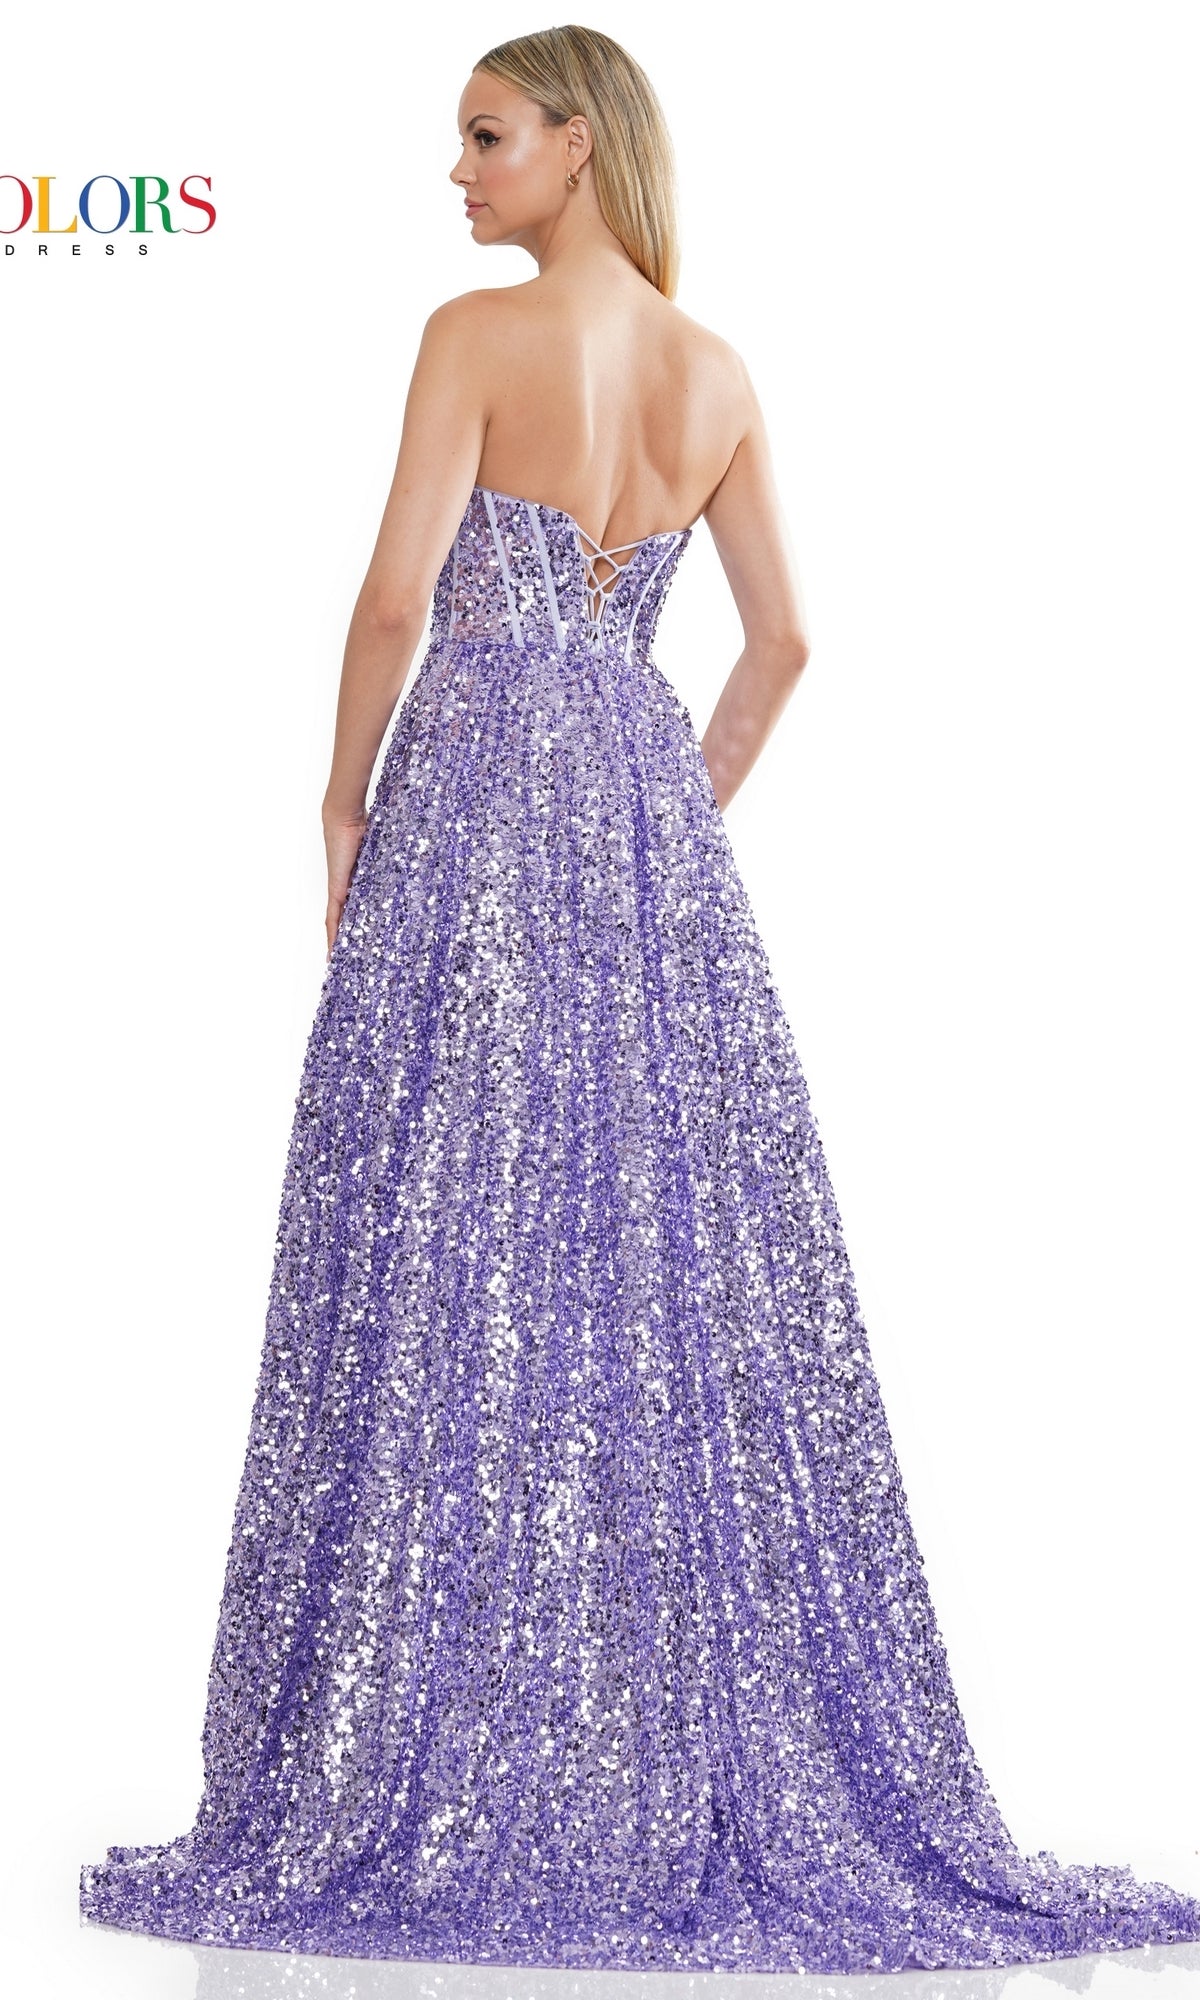 Sequin Strapless A-Line Formal Gown 3229 by Colors Dress